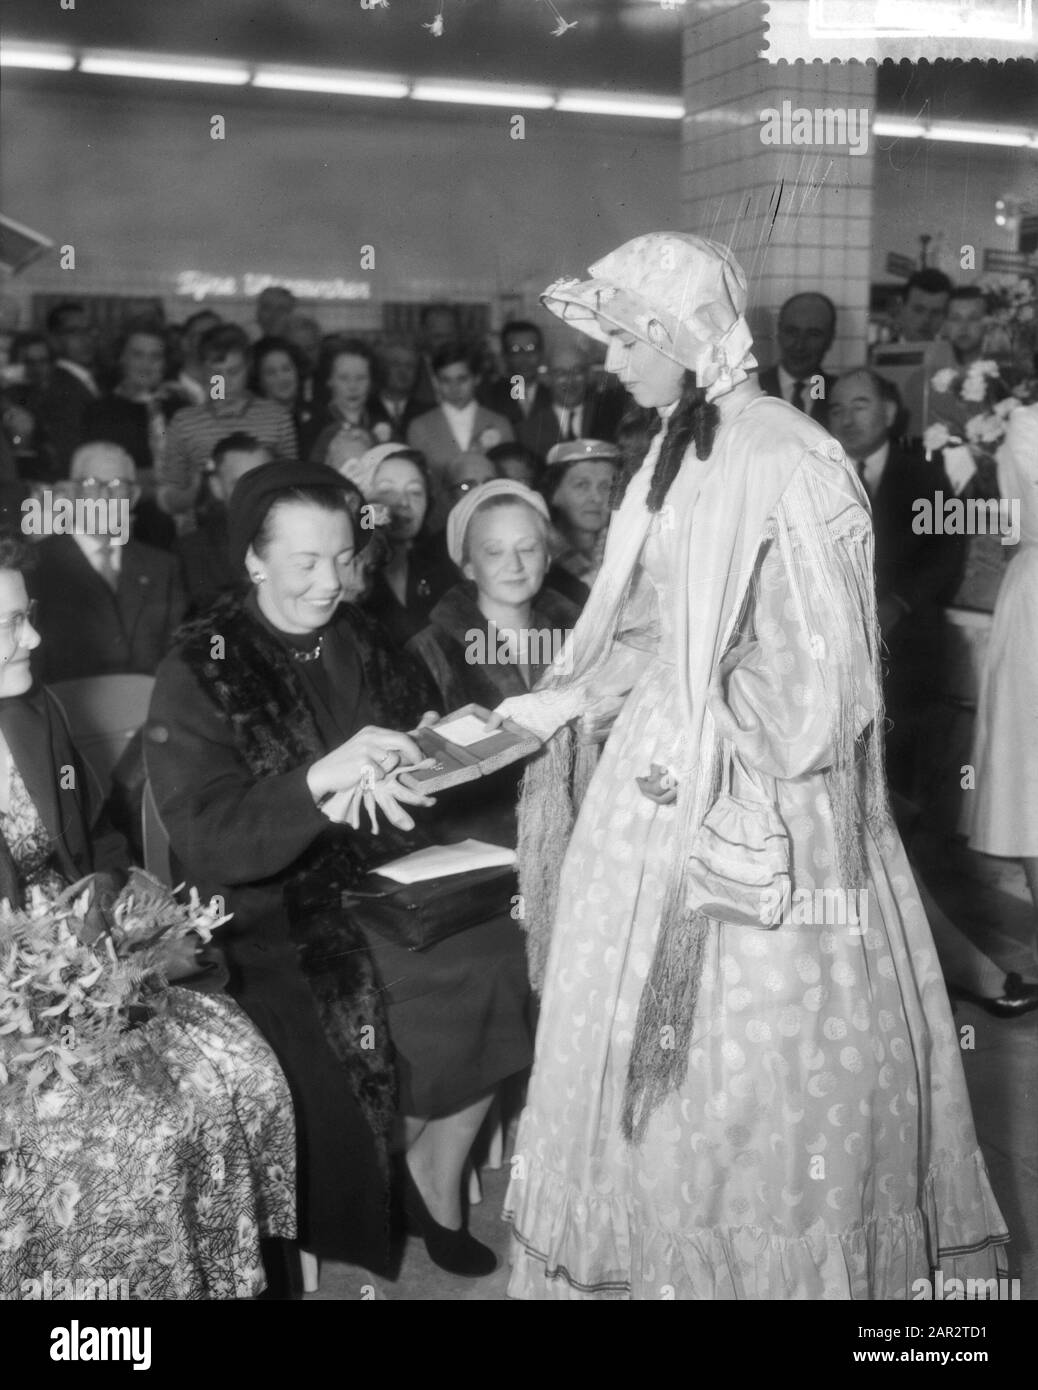 Opening HEMA in Amsterdam-West by Mrs van Hall Date: 21 March 1958  Location: Amsterdam, Noord-Holland Keywords: Openings Stock Photo - Alamy